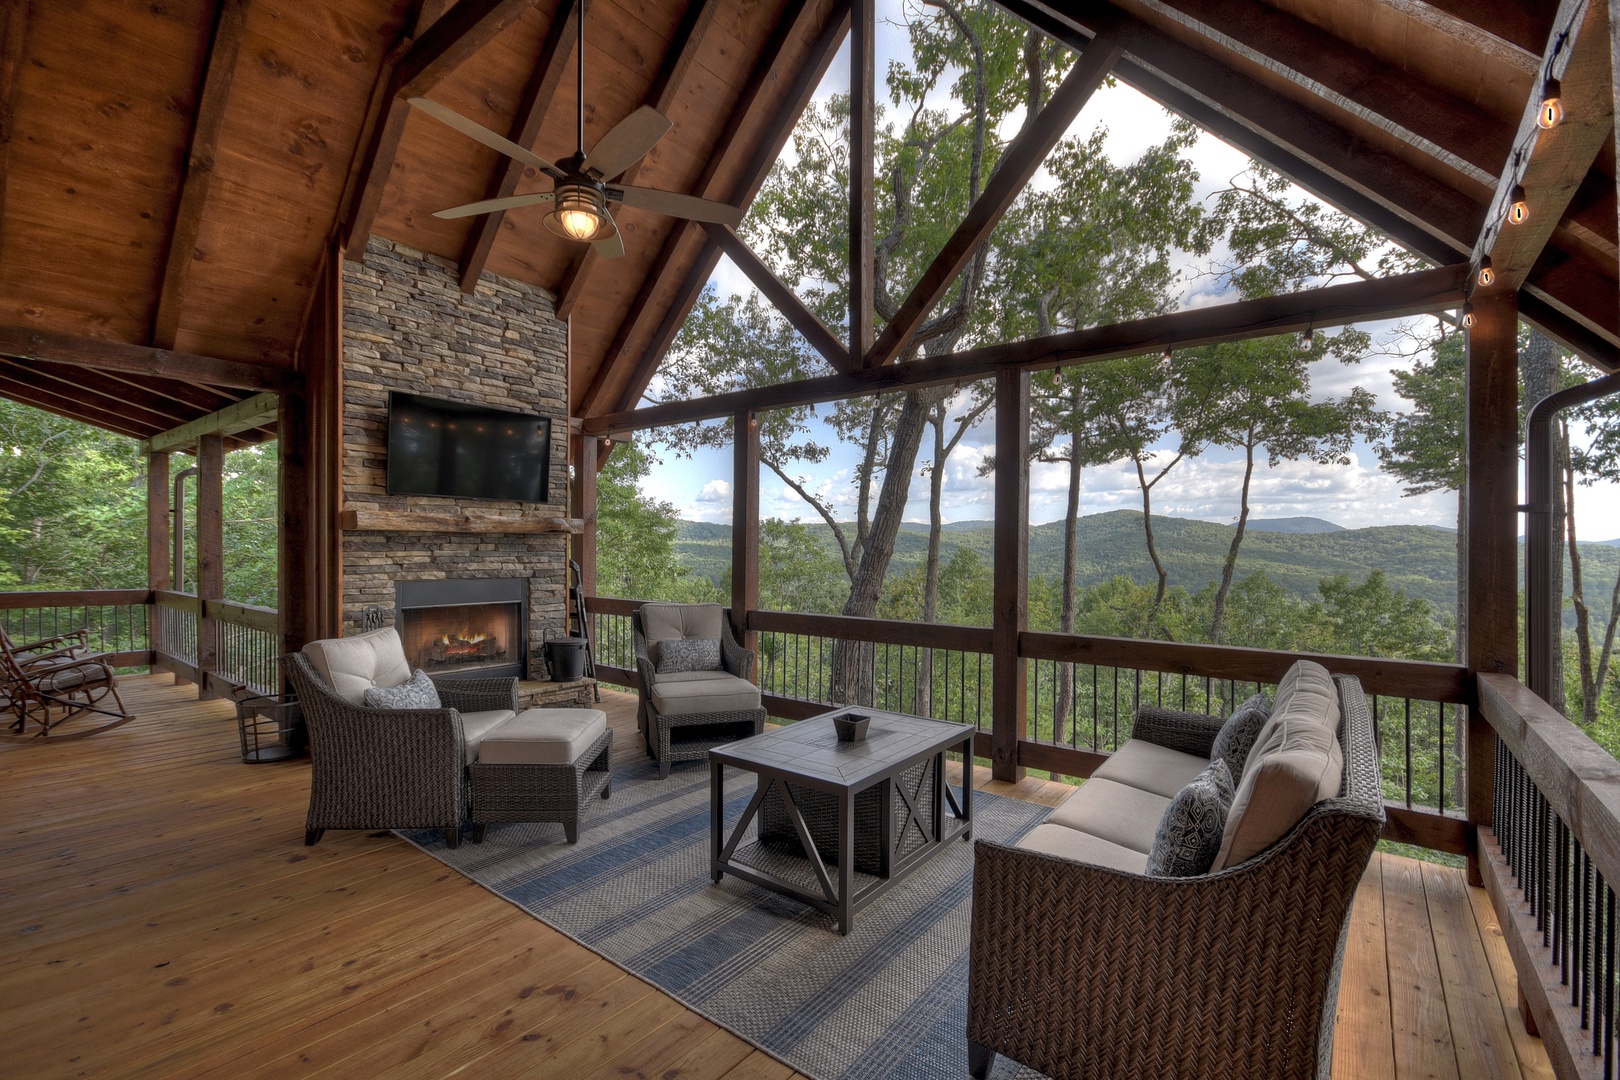 A Perfect Day- Entry level deck space with a fireplace and outdoor seating